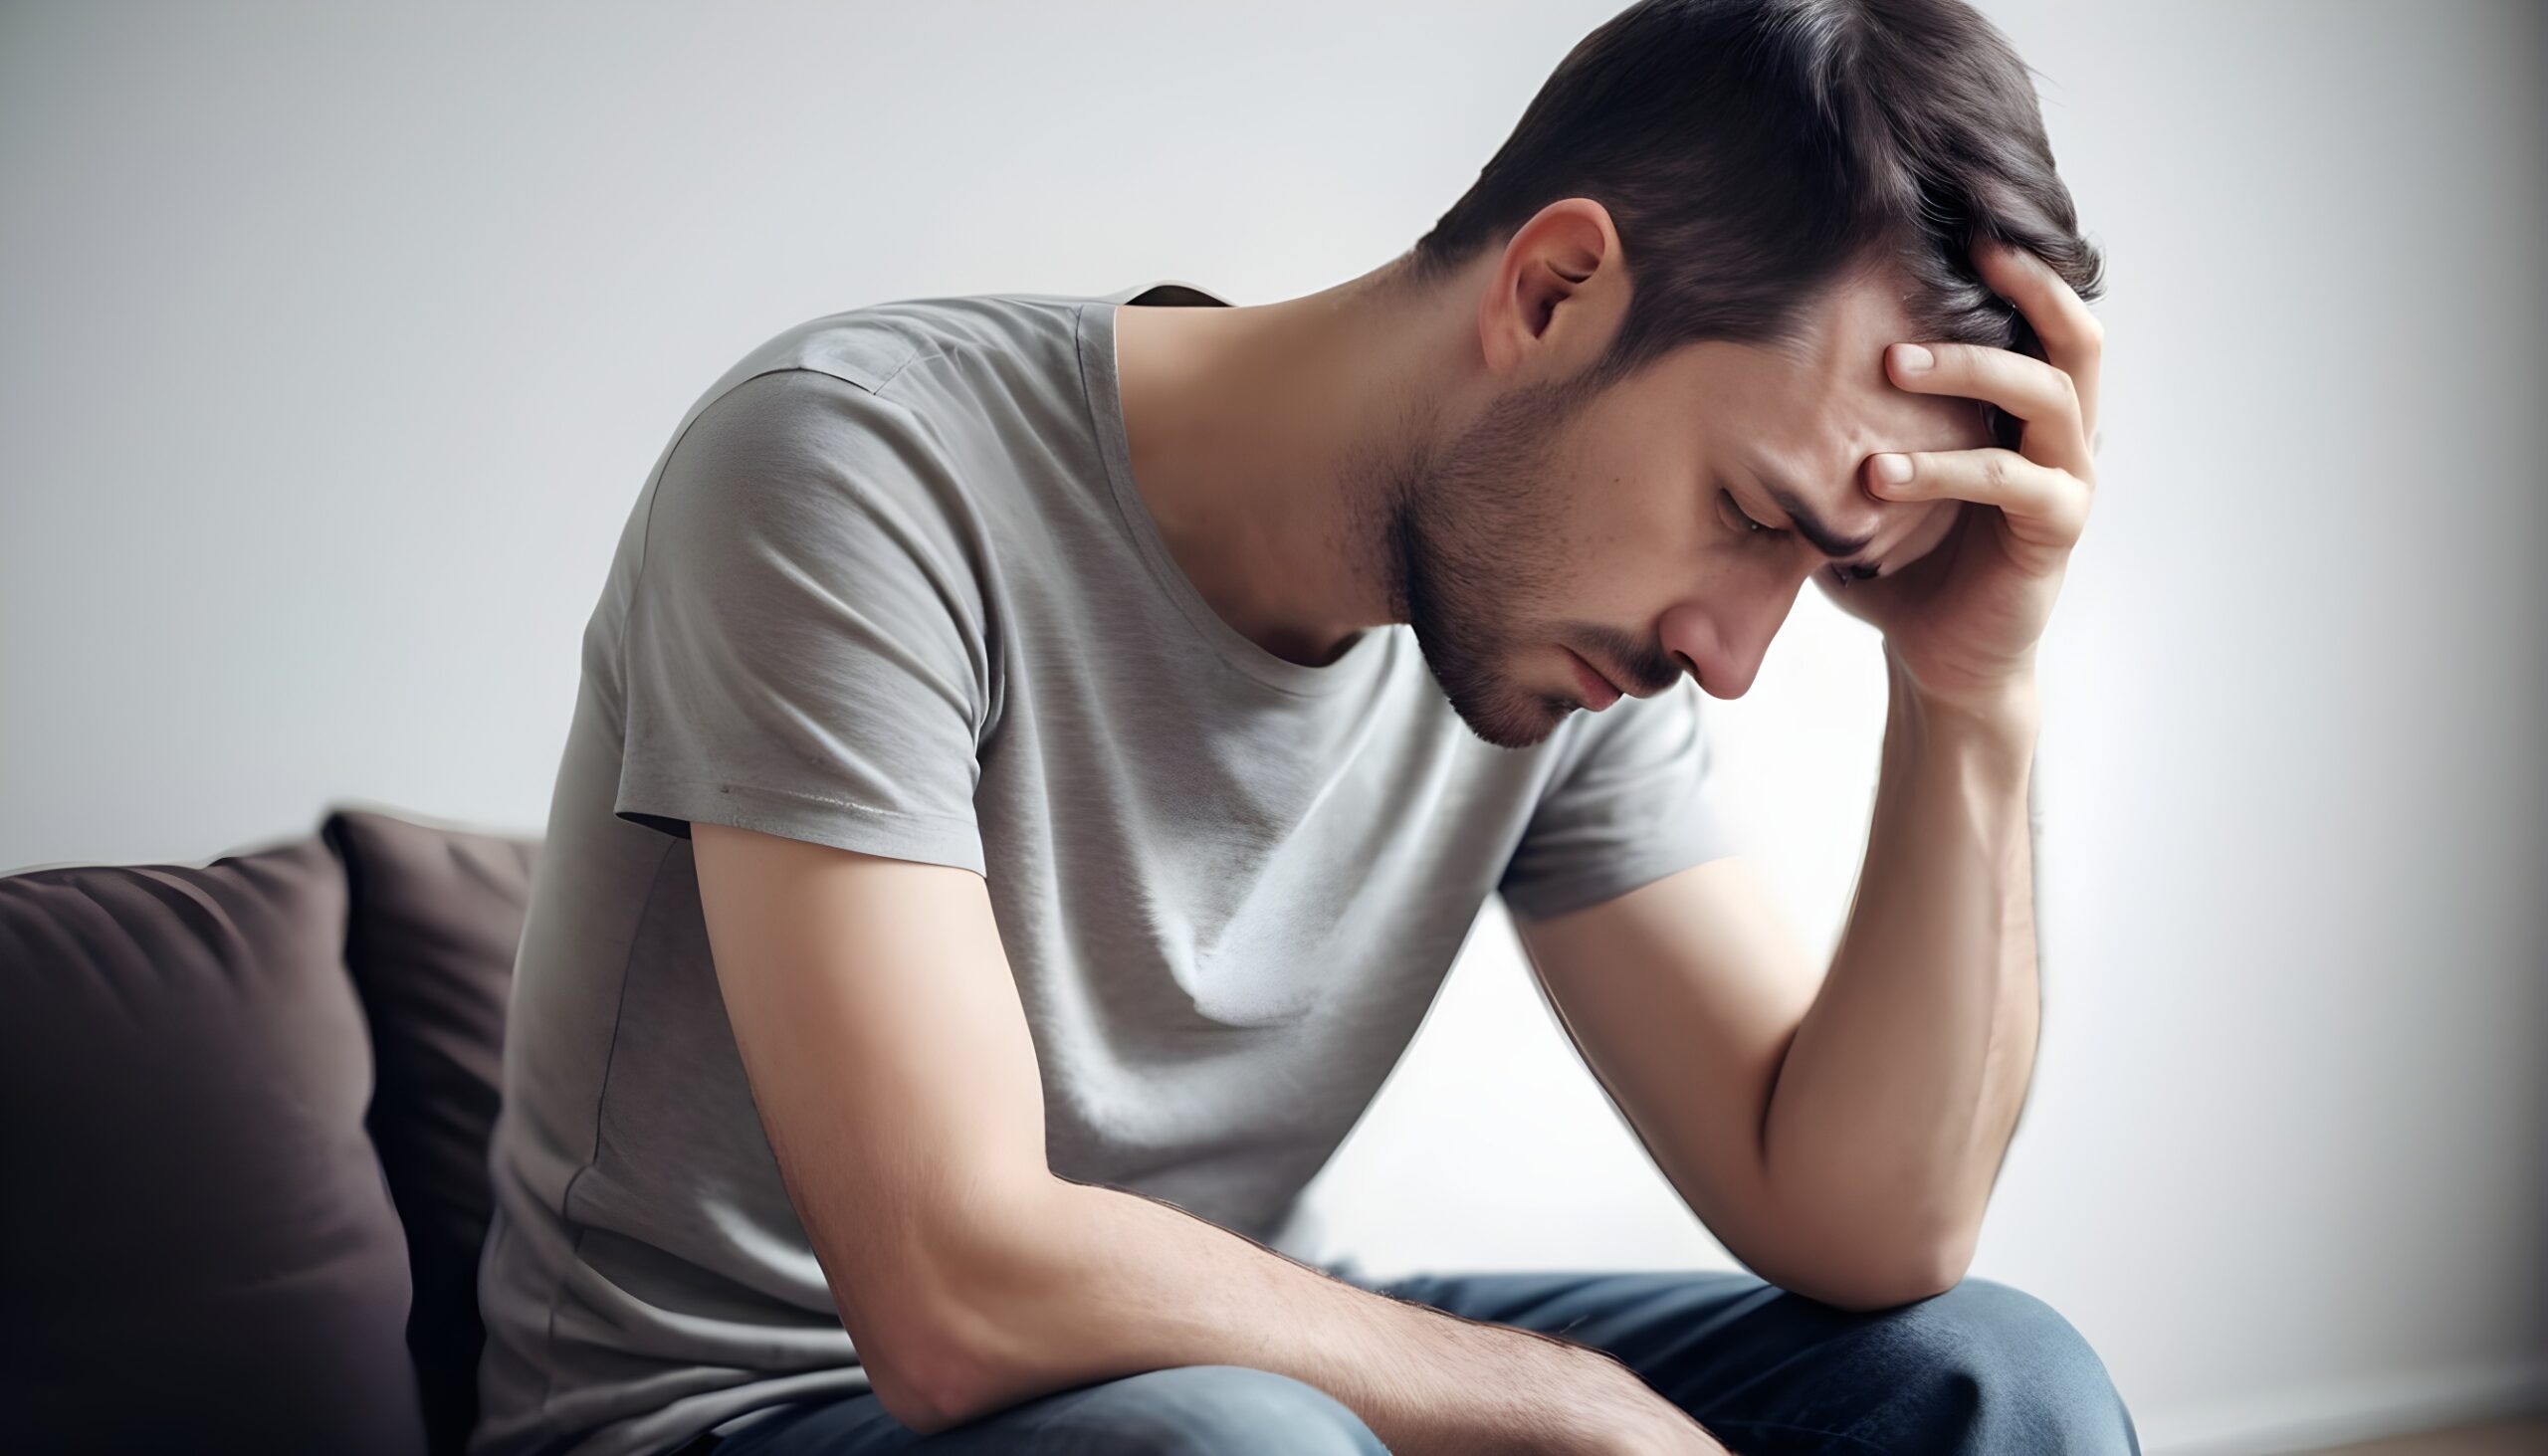 Symptoms And Causes of Depression to increase awareness